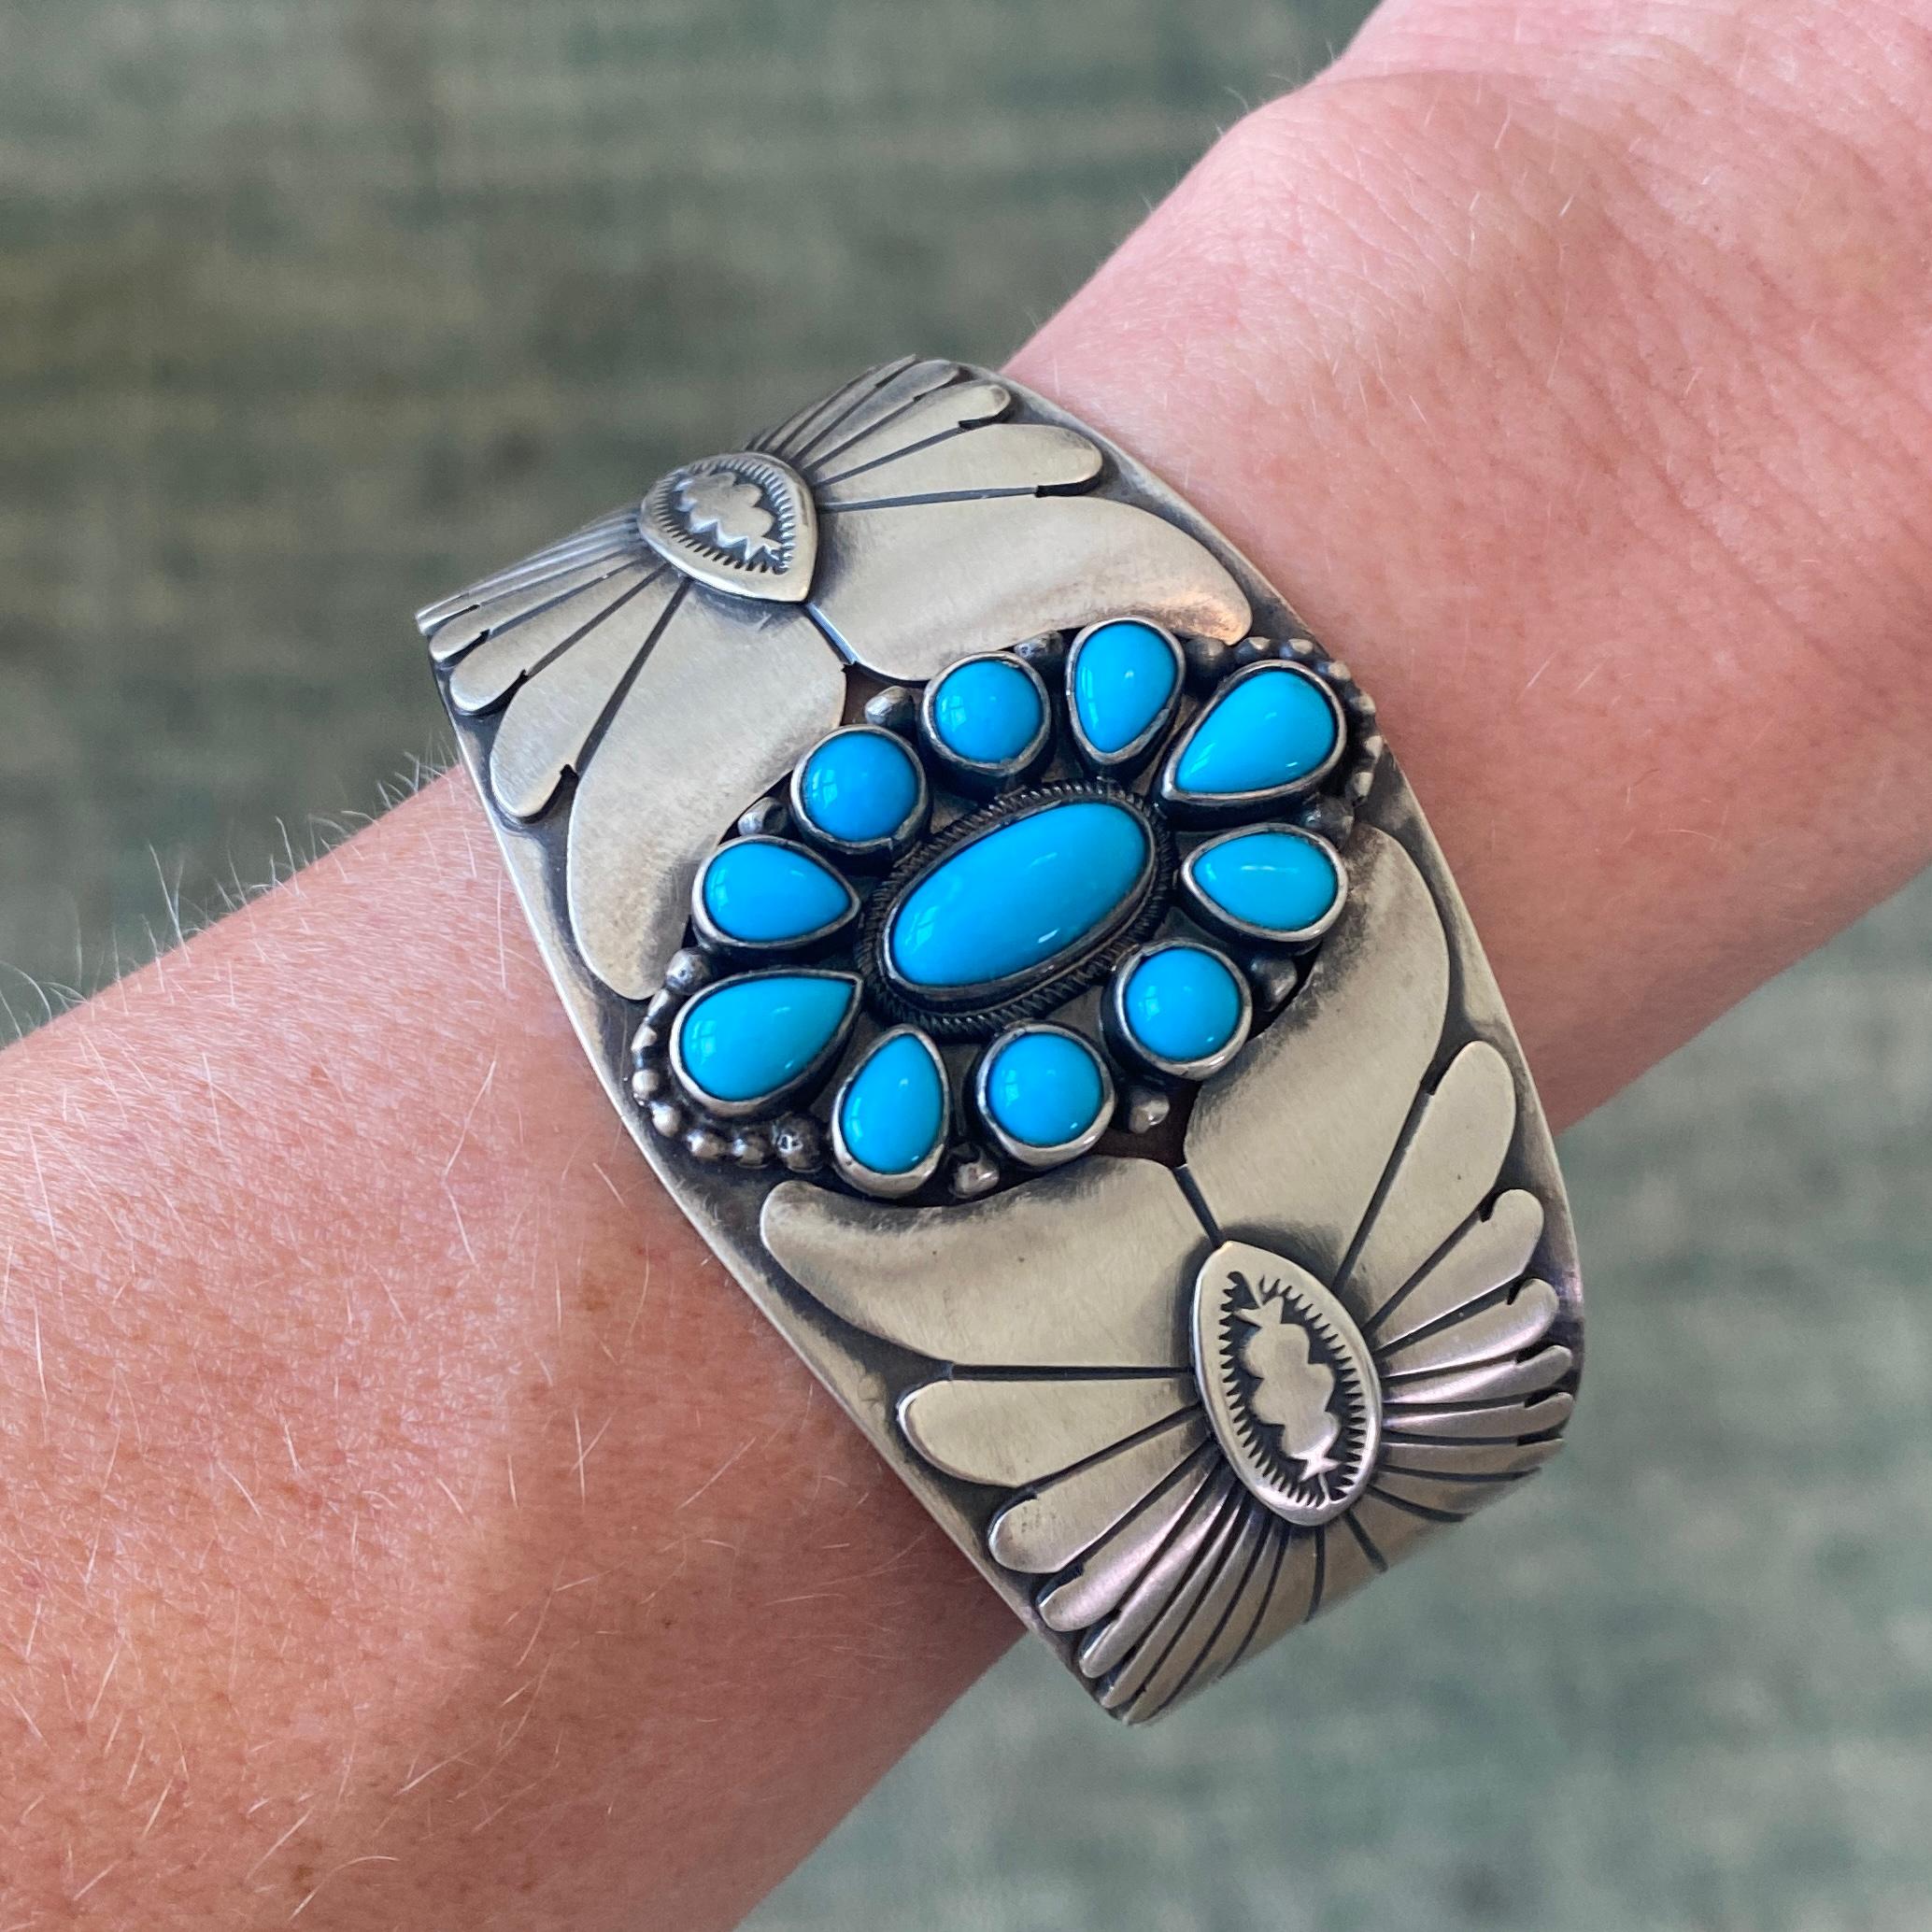 Vintage Navajo Mark Yazzie Sleeping Beauty Turquoise Sterling Silver Cuff
Beautiful Silver patina with layers of silver on silver around the cuff bracelet.  Bright , smooth, blue turquoise shine on the very front.
Size Medium for women, small for